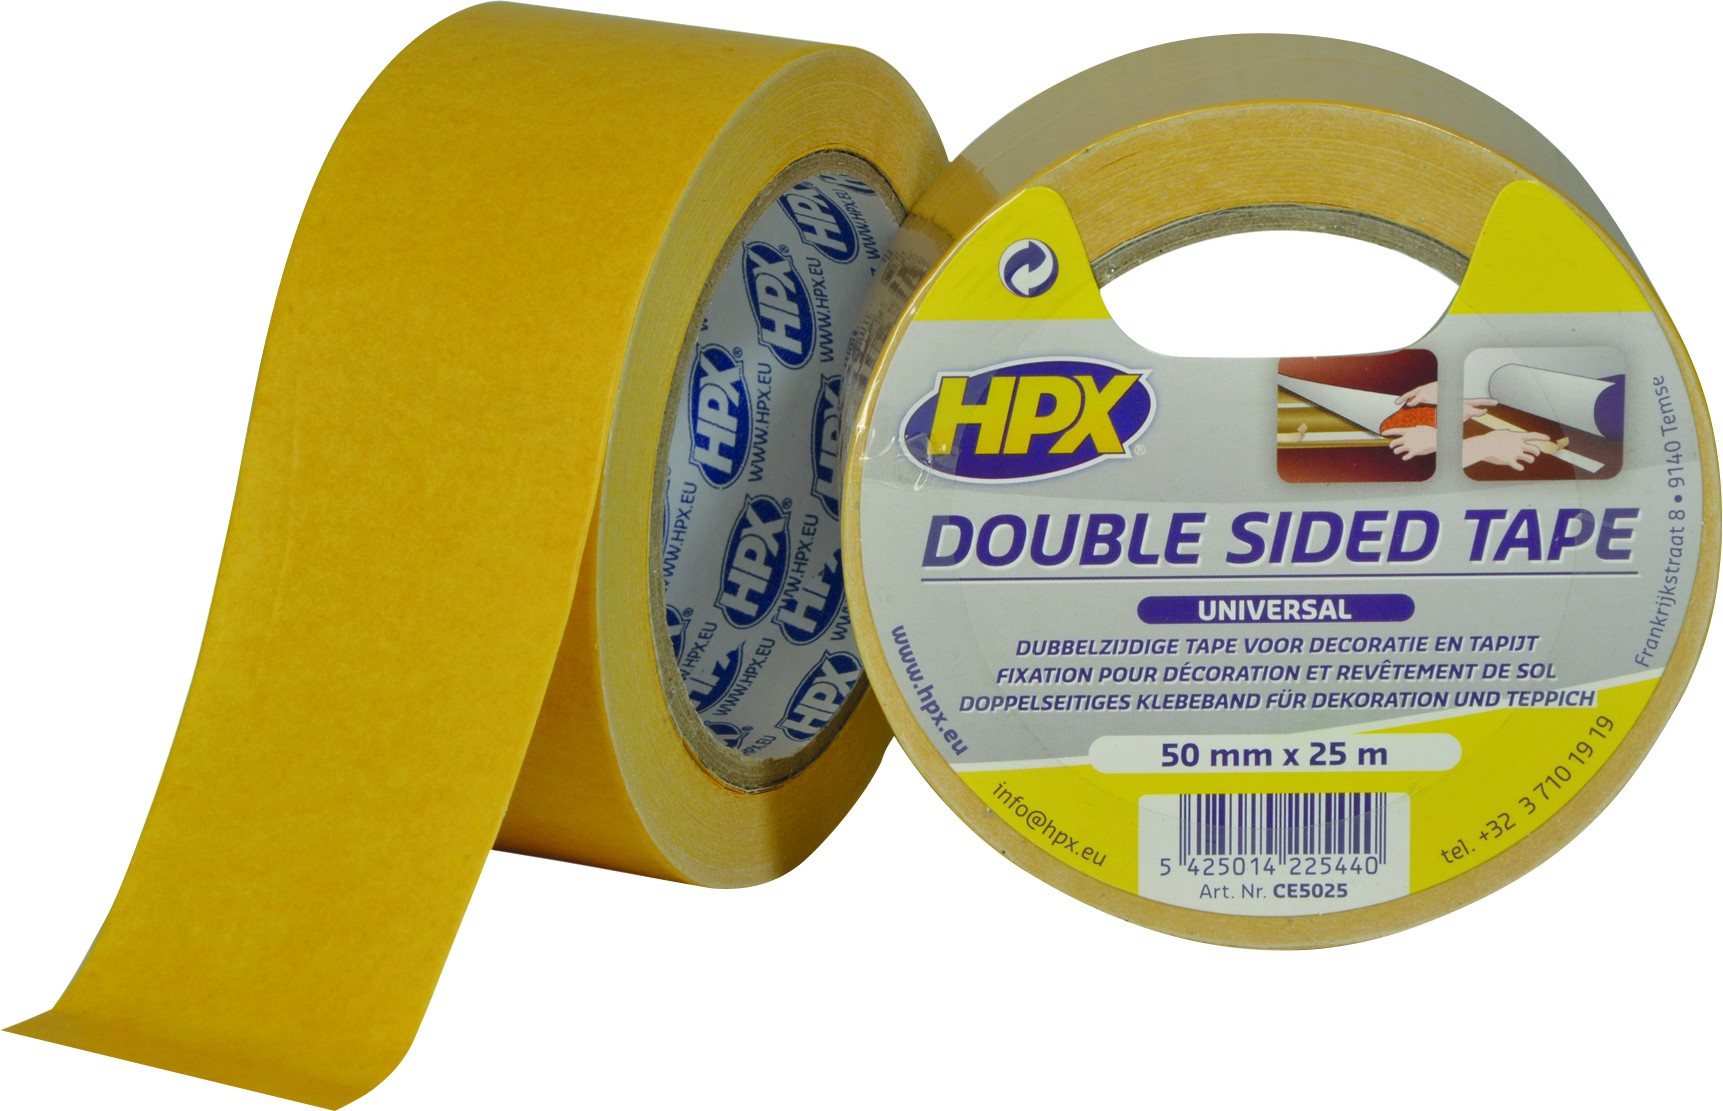 RUBAN DOUBLE SIDED TAPE- DOUBLE FACE UNIVERSEL -BLANC 50MM X 25M